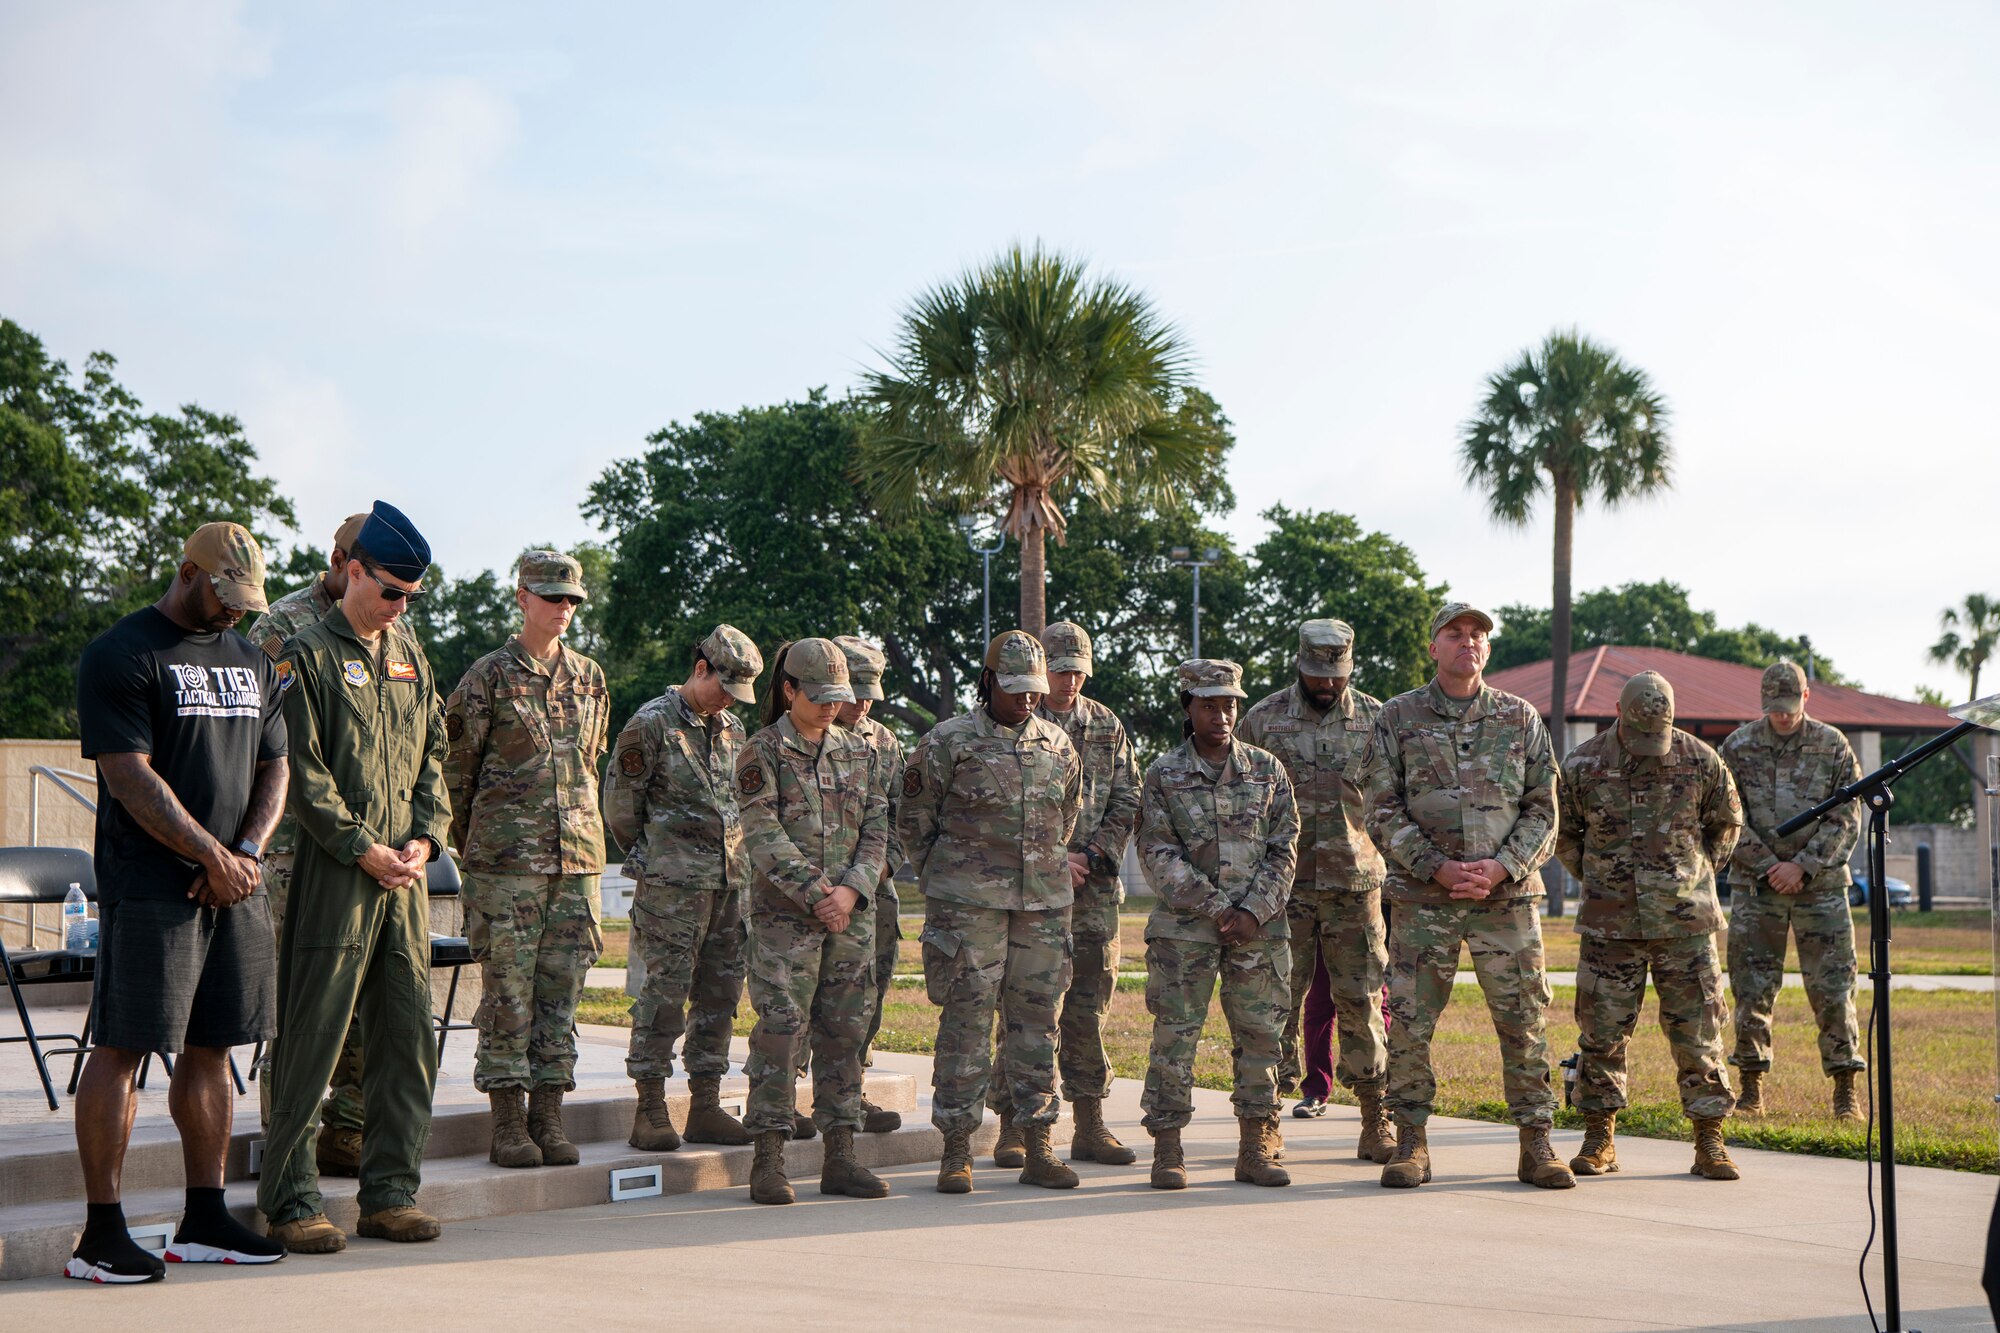 U.S. Air Force Airmen assigned to the 6th Air Refueling Wing bow their heads during a prayer vigil at MacDill Air Force Base, Florida, May 19, 2022. The Airmen gathered in light of recent violence nationwide and held a prayer for the country, victims and family members affected. (U.S. Air Force photo by Airman 1st Class Hiram Martinez)